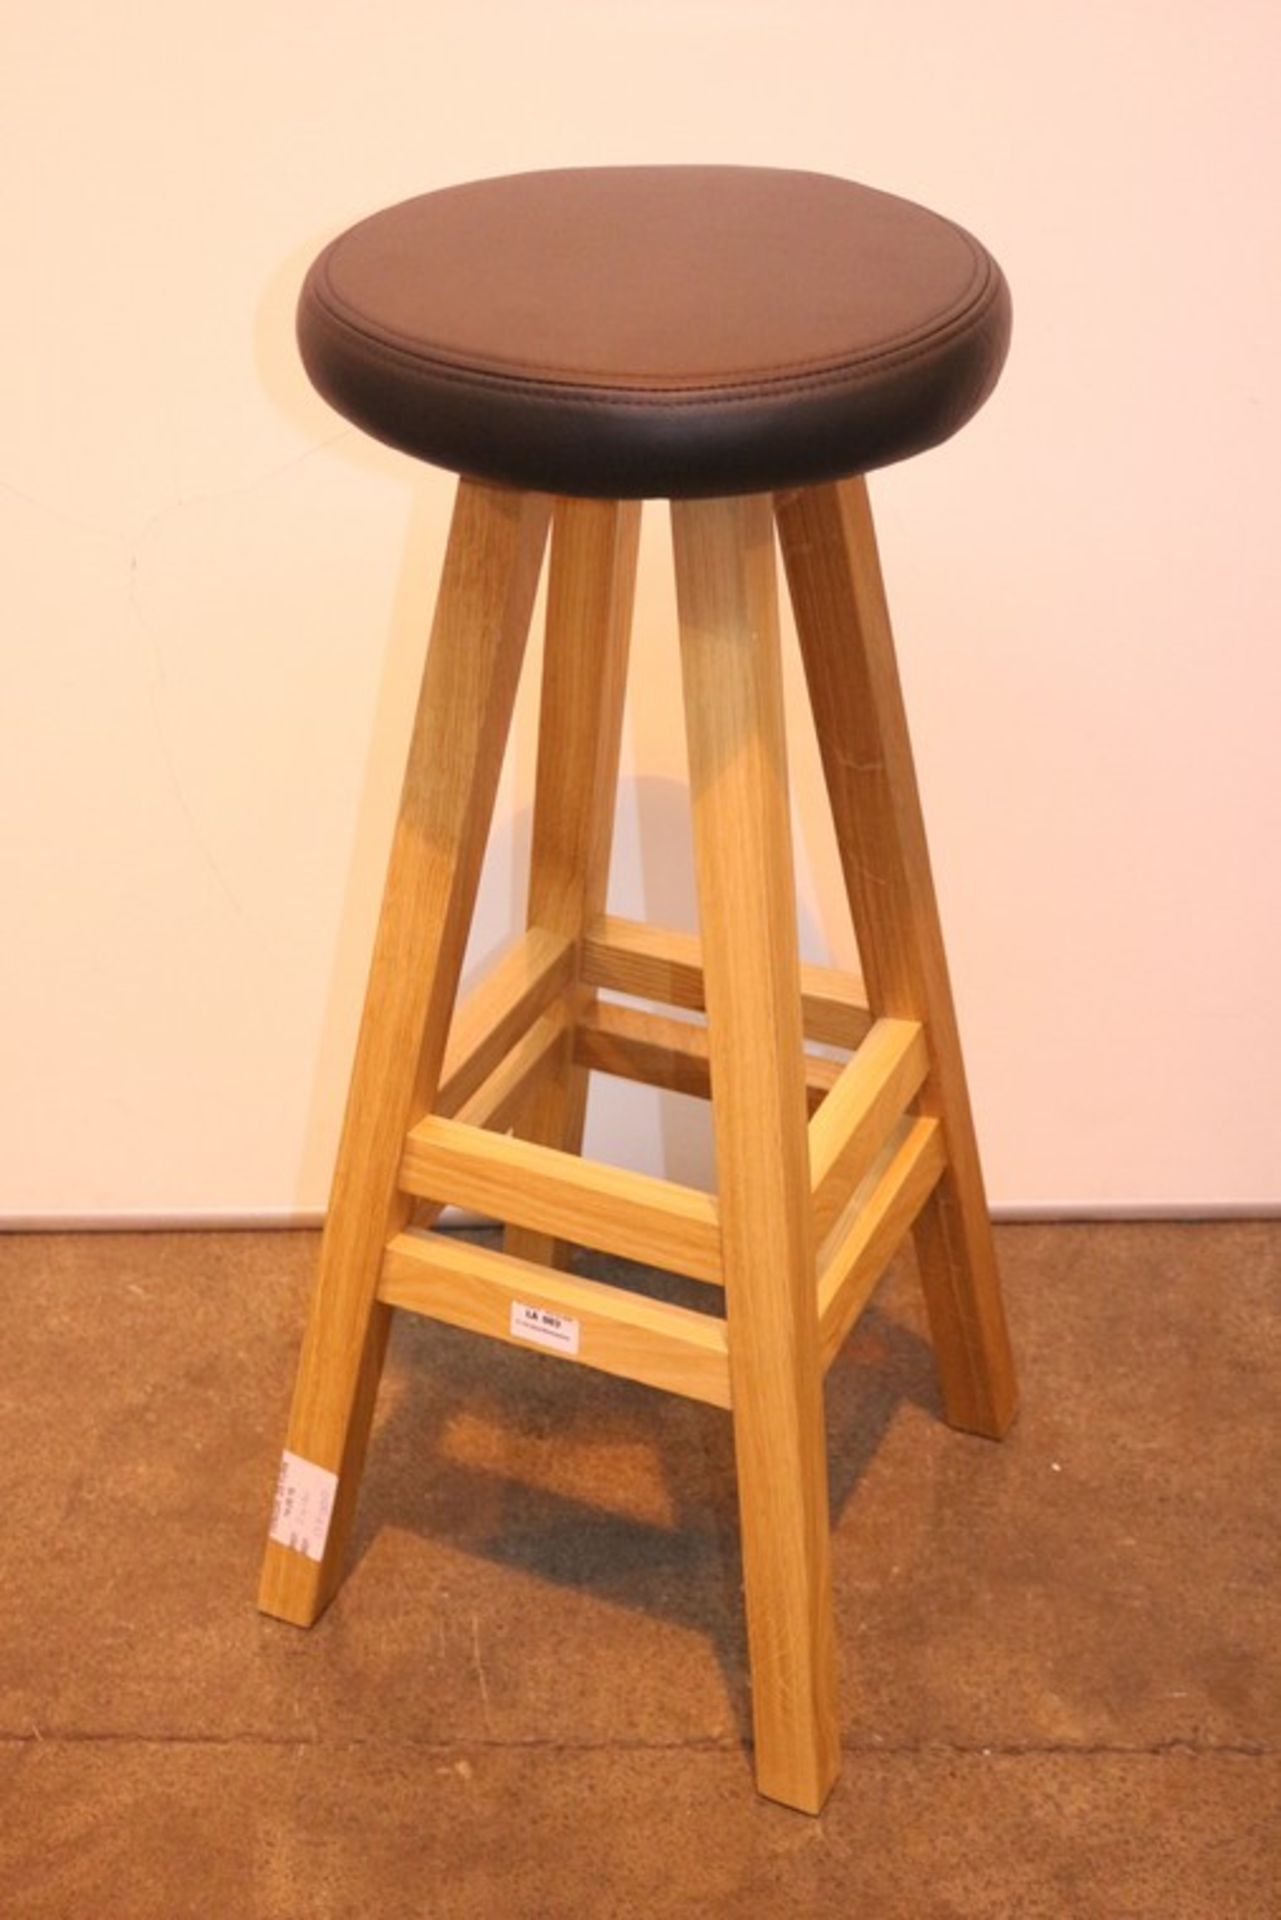 1 x BOXED MATTHEW HILTON CASE FILE OKI-NAMI TALL NATURAL BAR STOOL WITH LEATHER TOP (24191) RRP £200